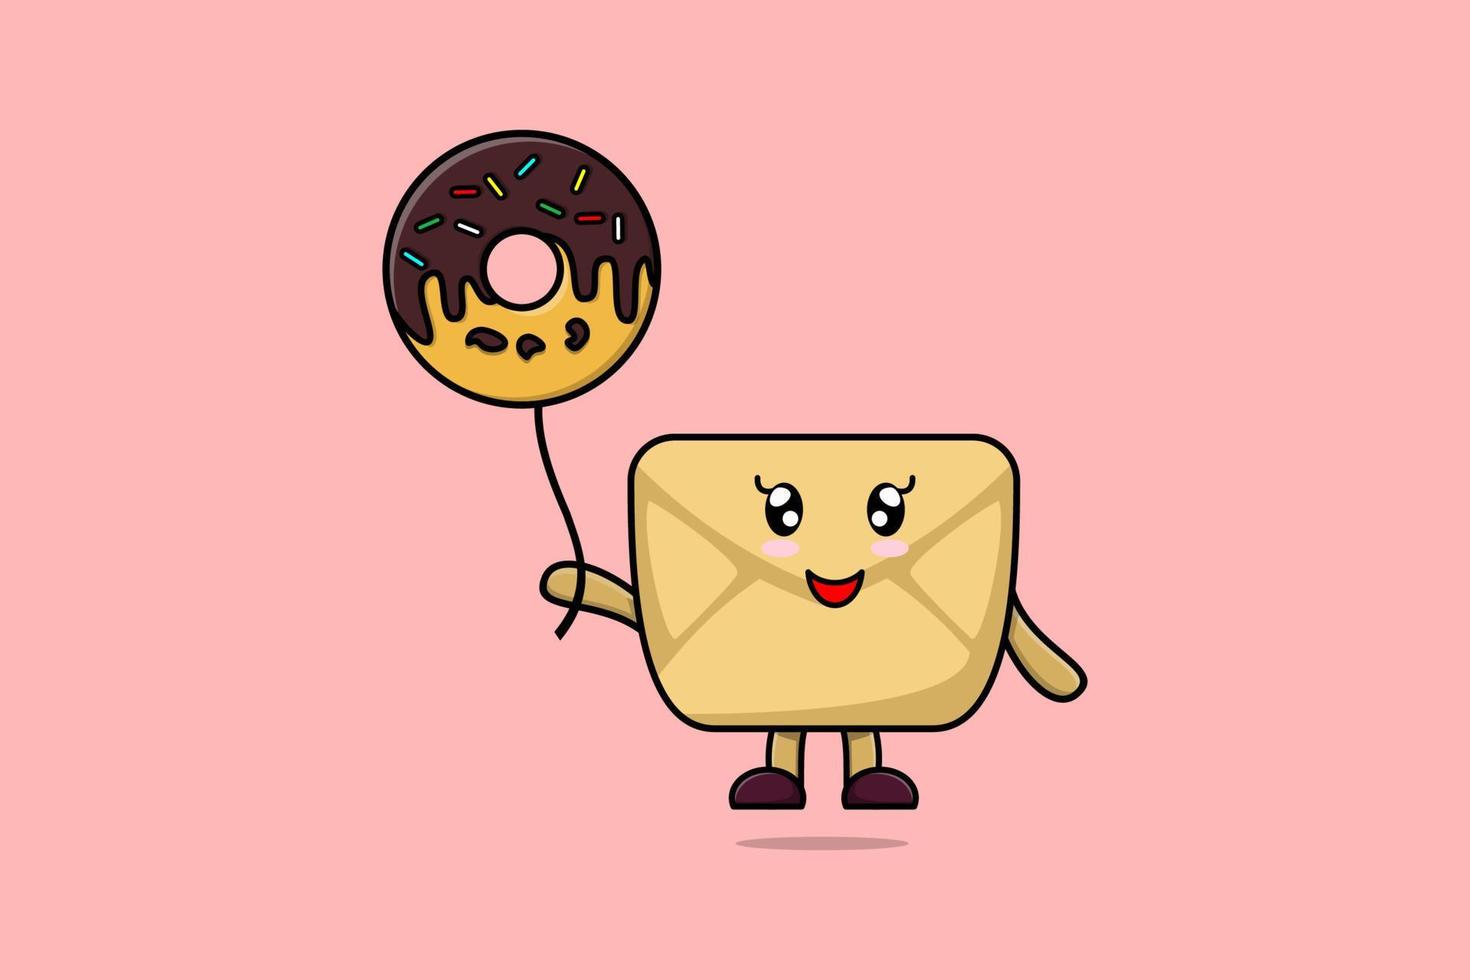 Cute cartoon Envelope floating with donuts balloon vector